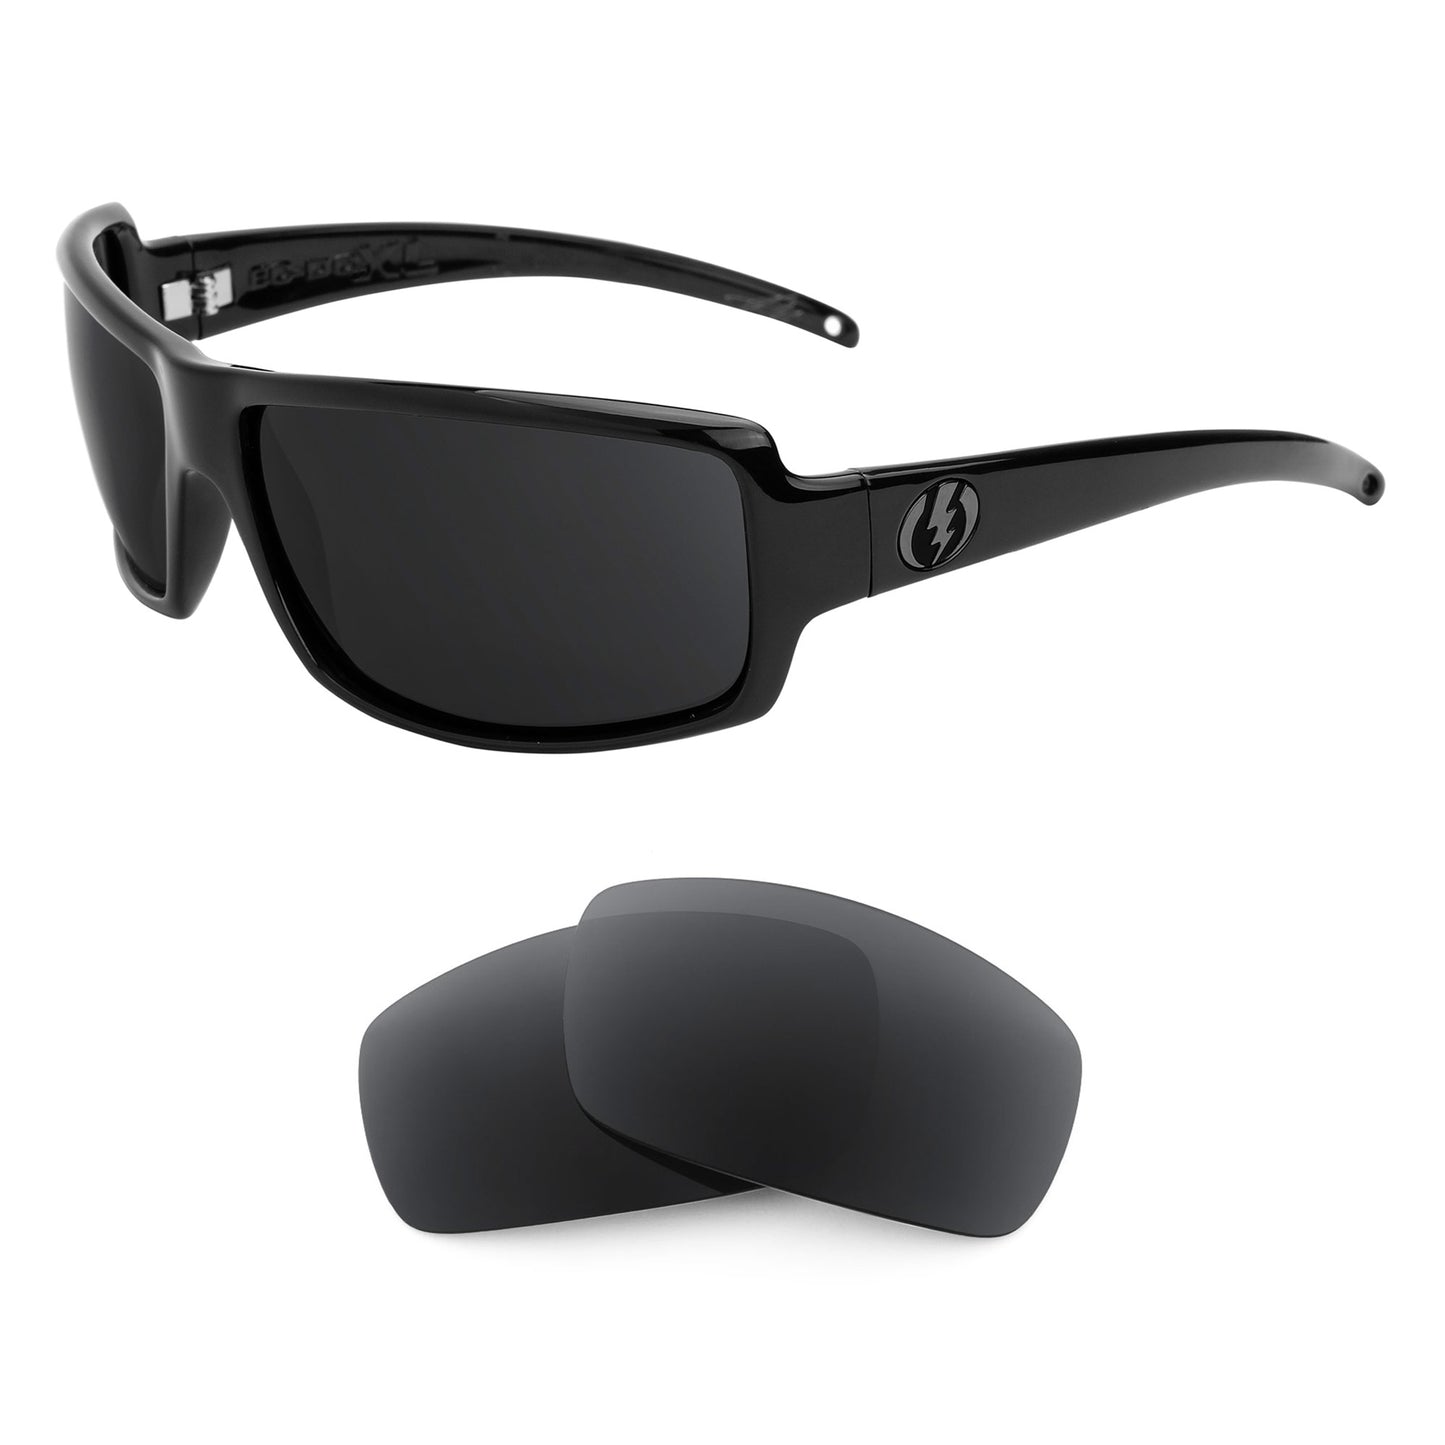 Electric EC-DC XL sunglasses with replacement lenses